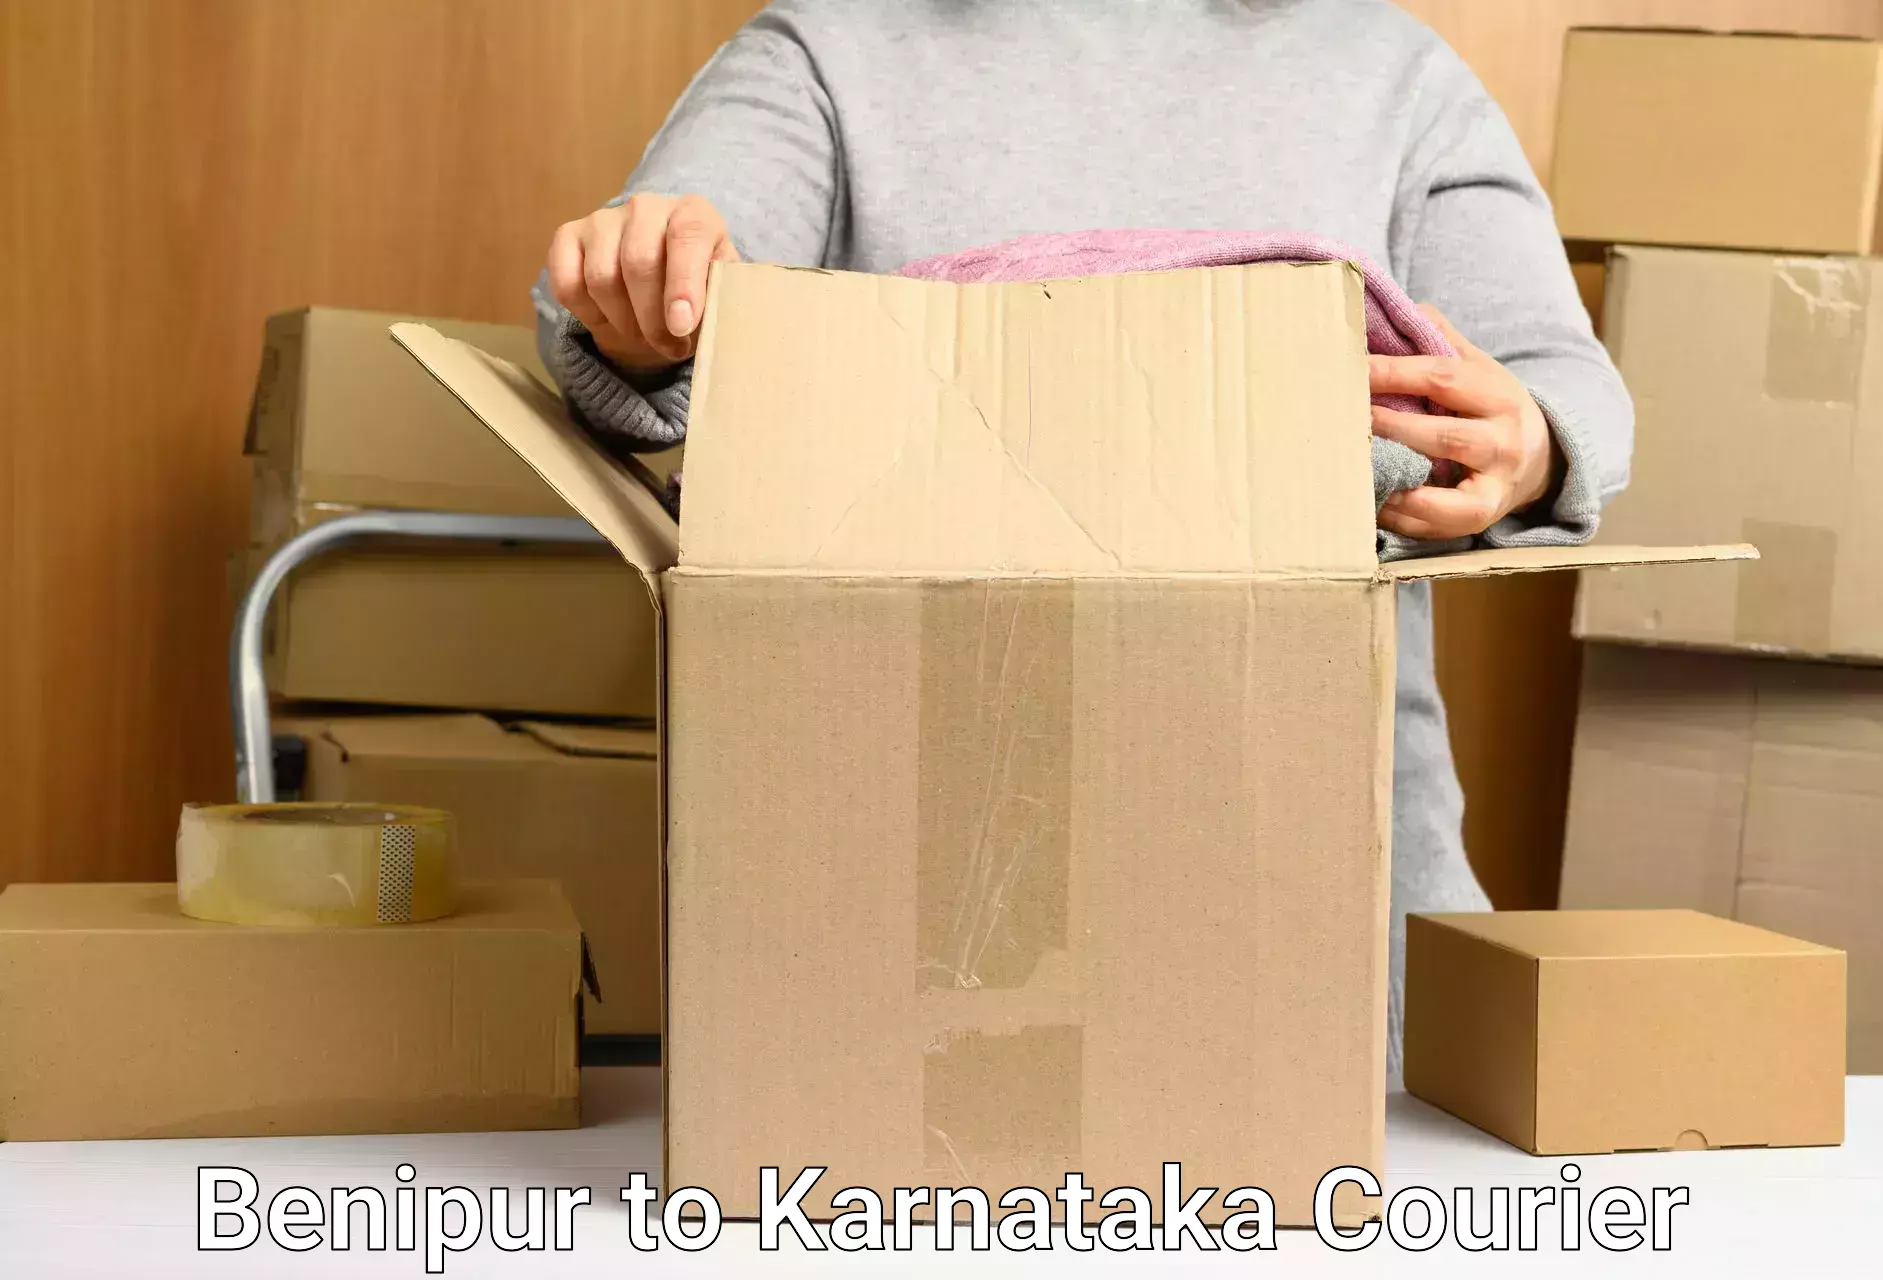 Full-service courier options Benipur to Hunsur